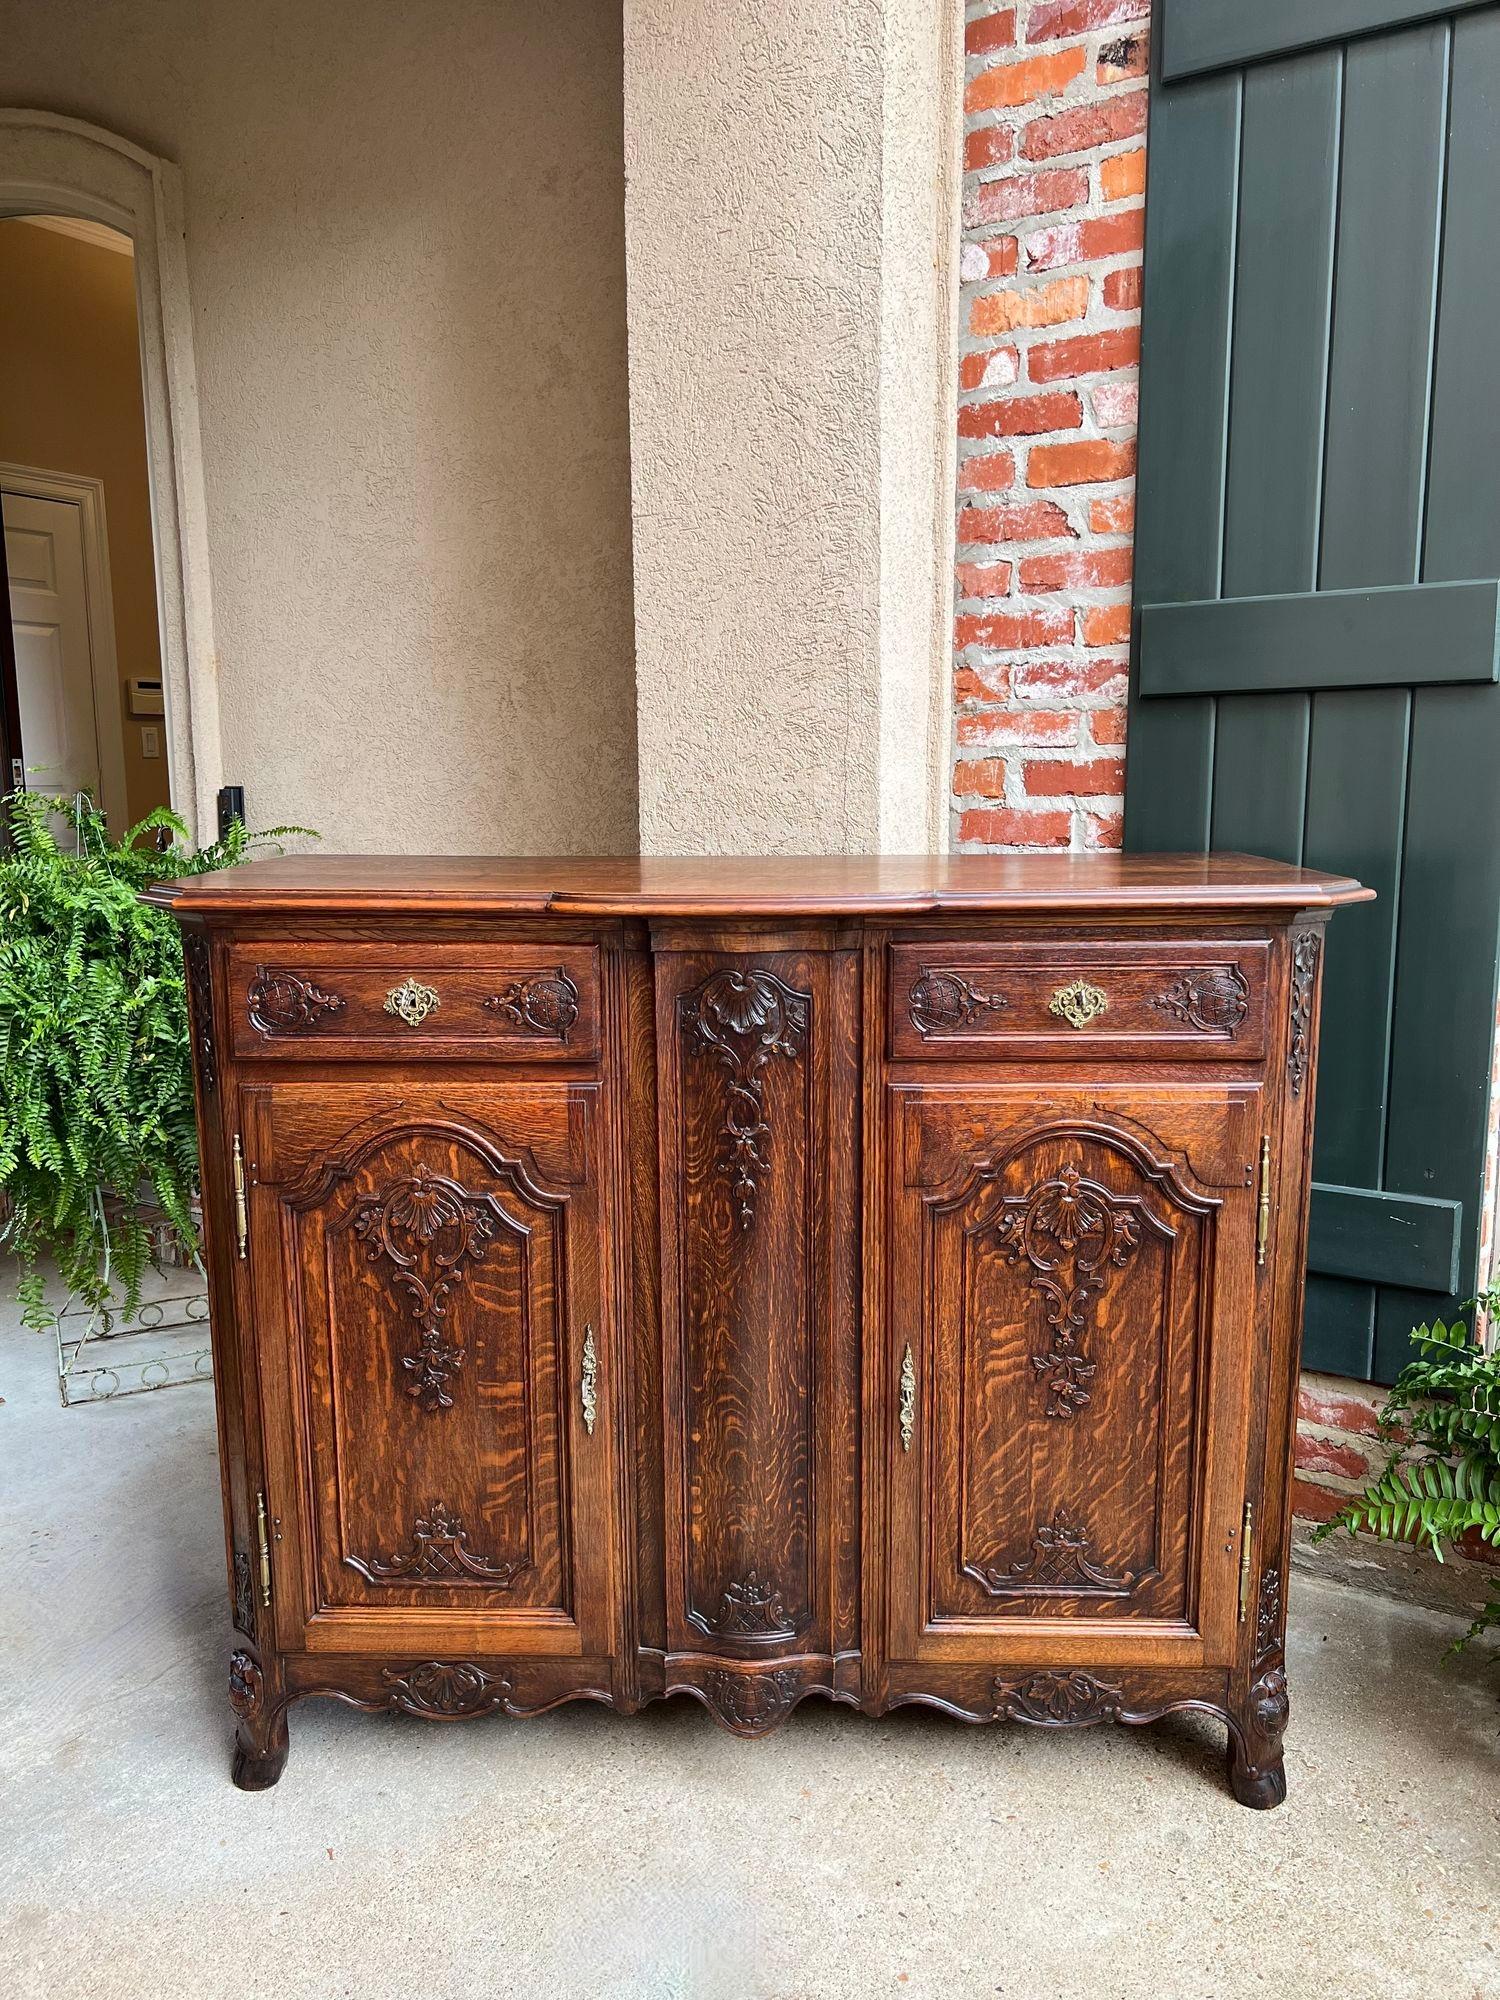 Antique French Sideboard Foyer Cabinet Louis XV Carved Tiger Oak 19th century.

Direct from France, a highly carved antique sideboard or chest with exquisite French style.
Carved fronts to the two drawers and two doors with carvings on the